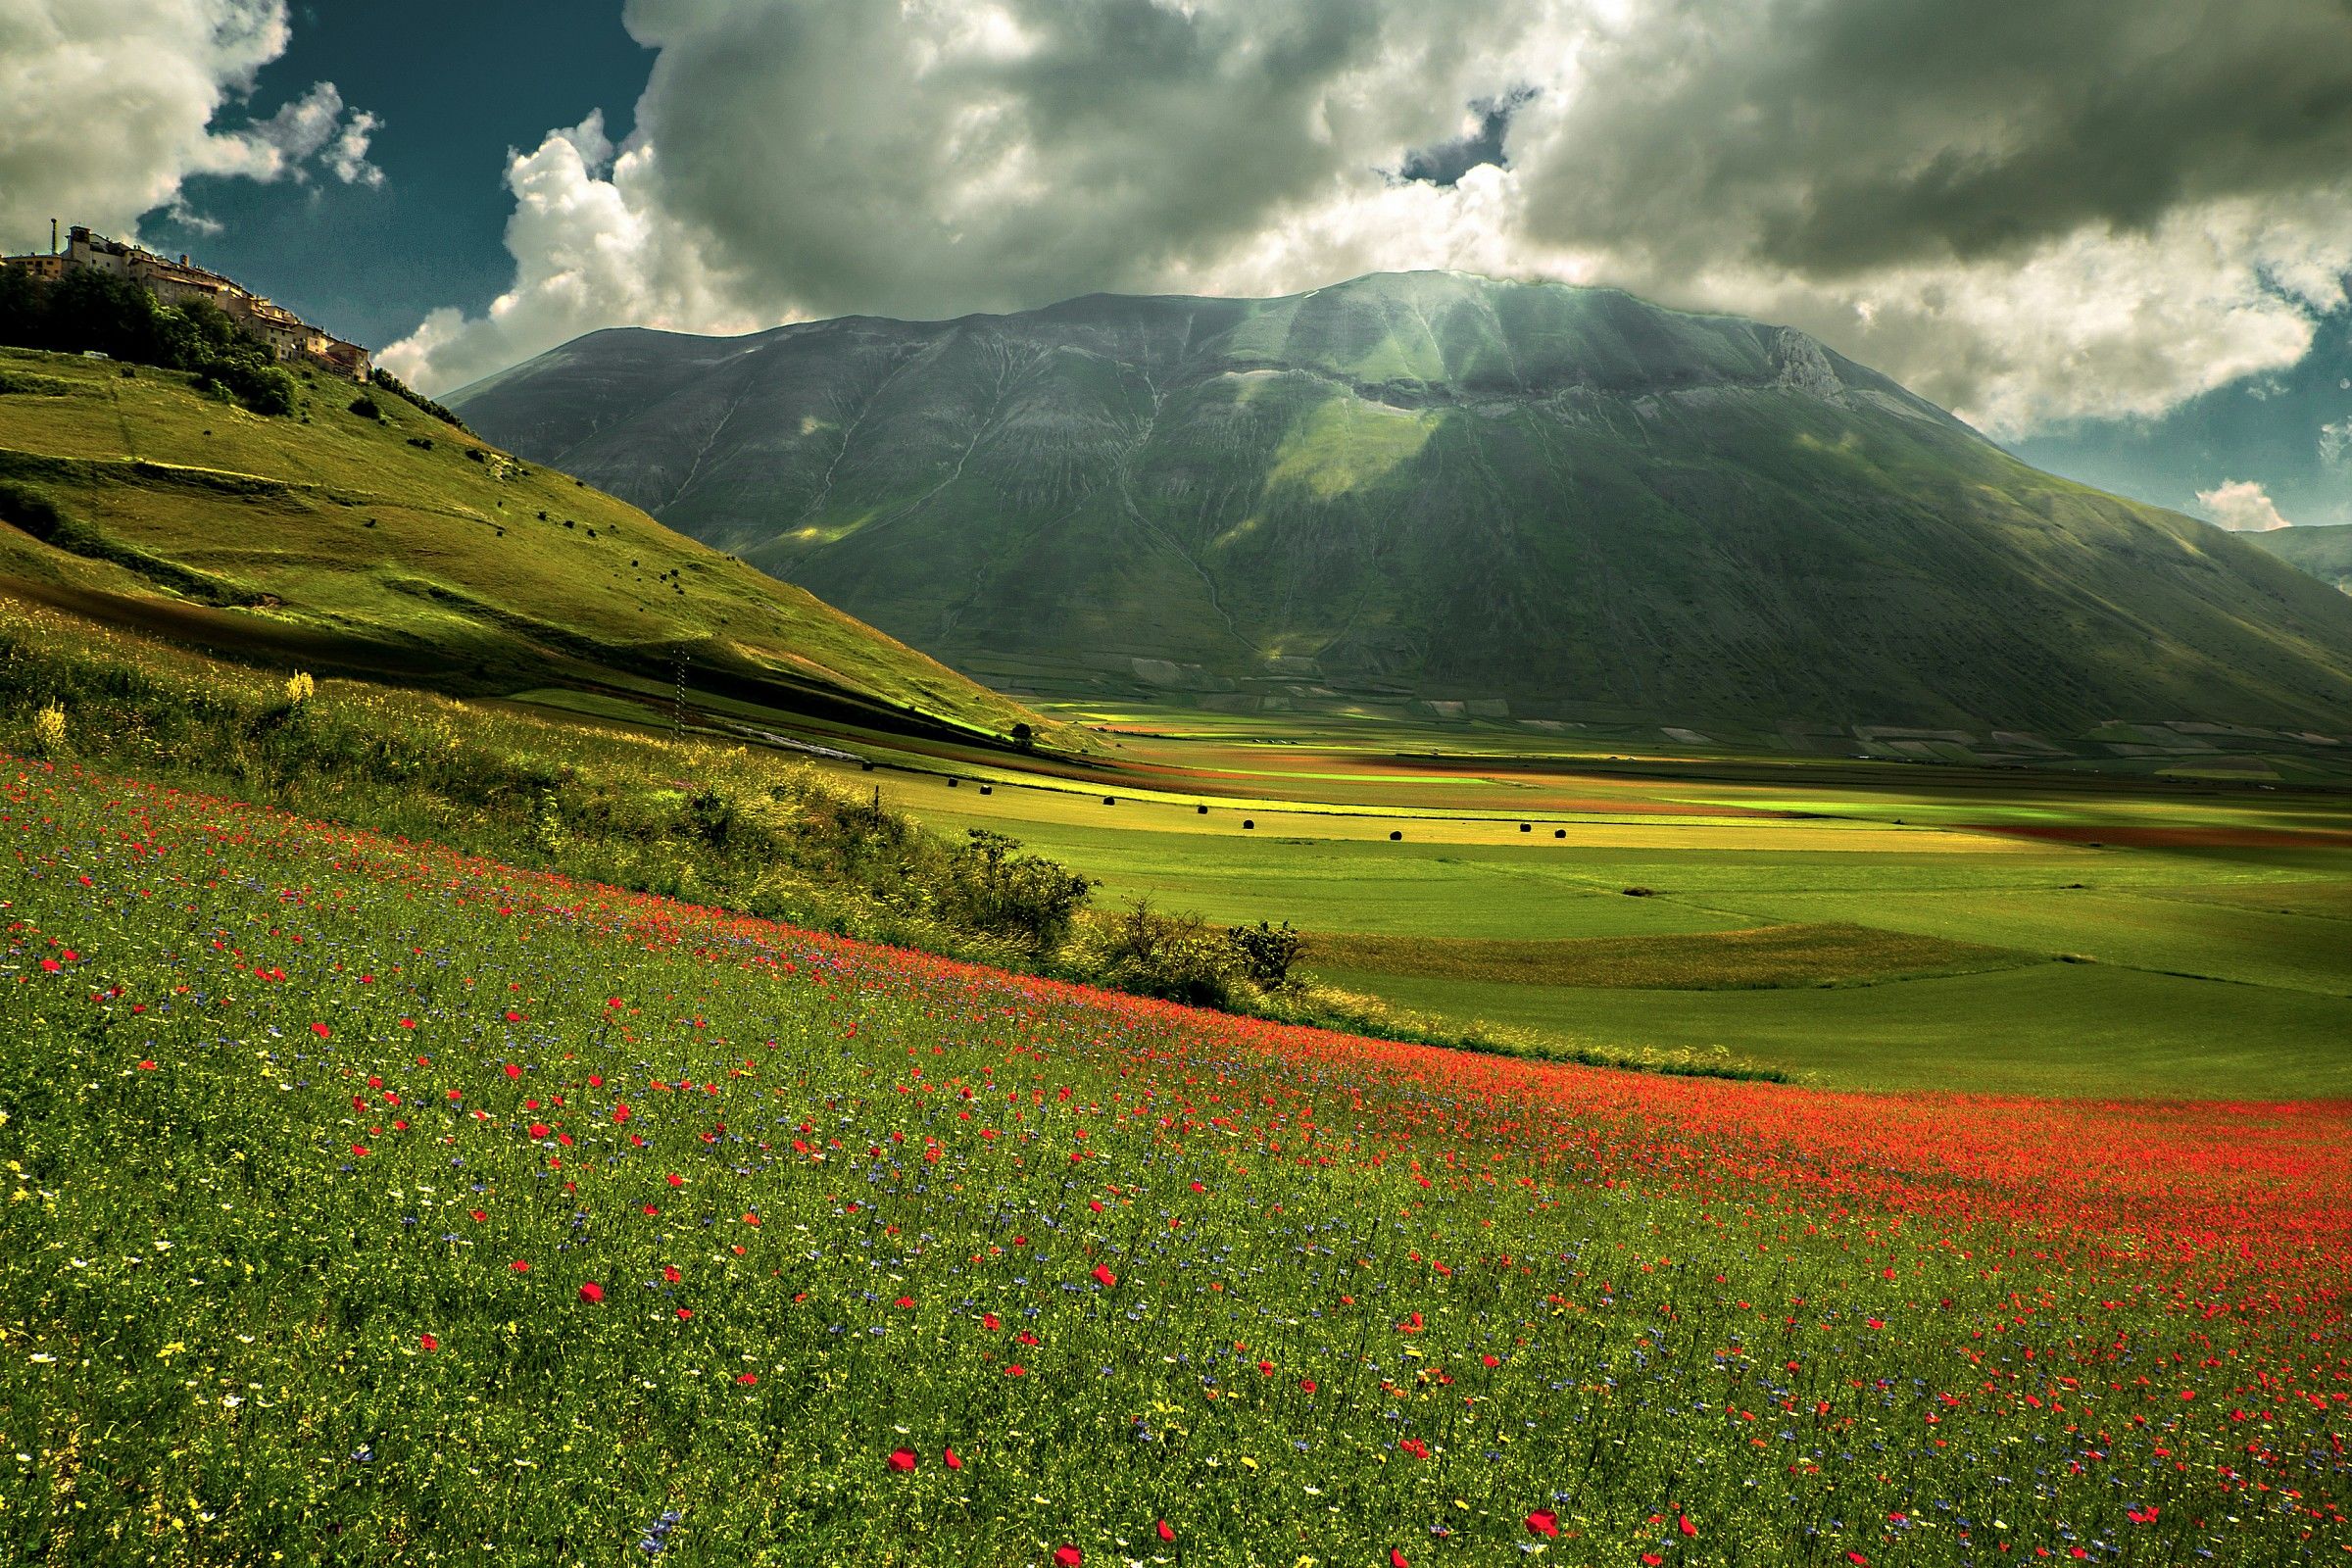 Castelluccio and its flowers 2...